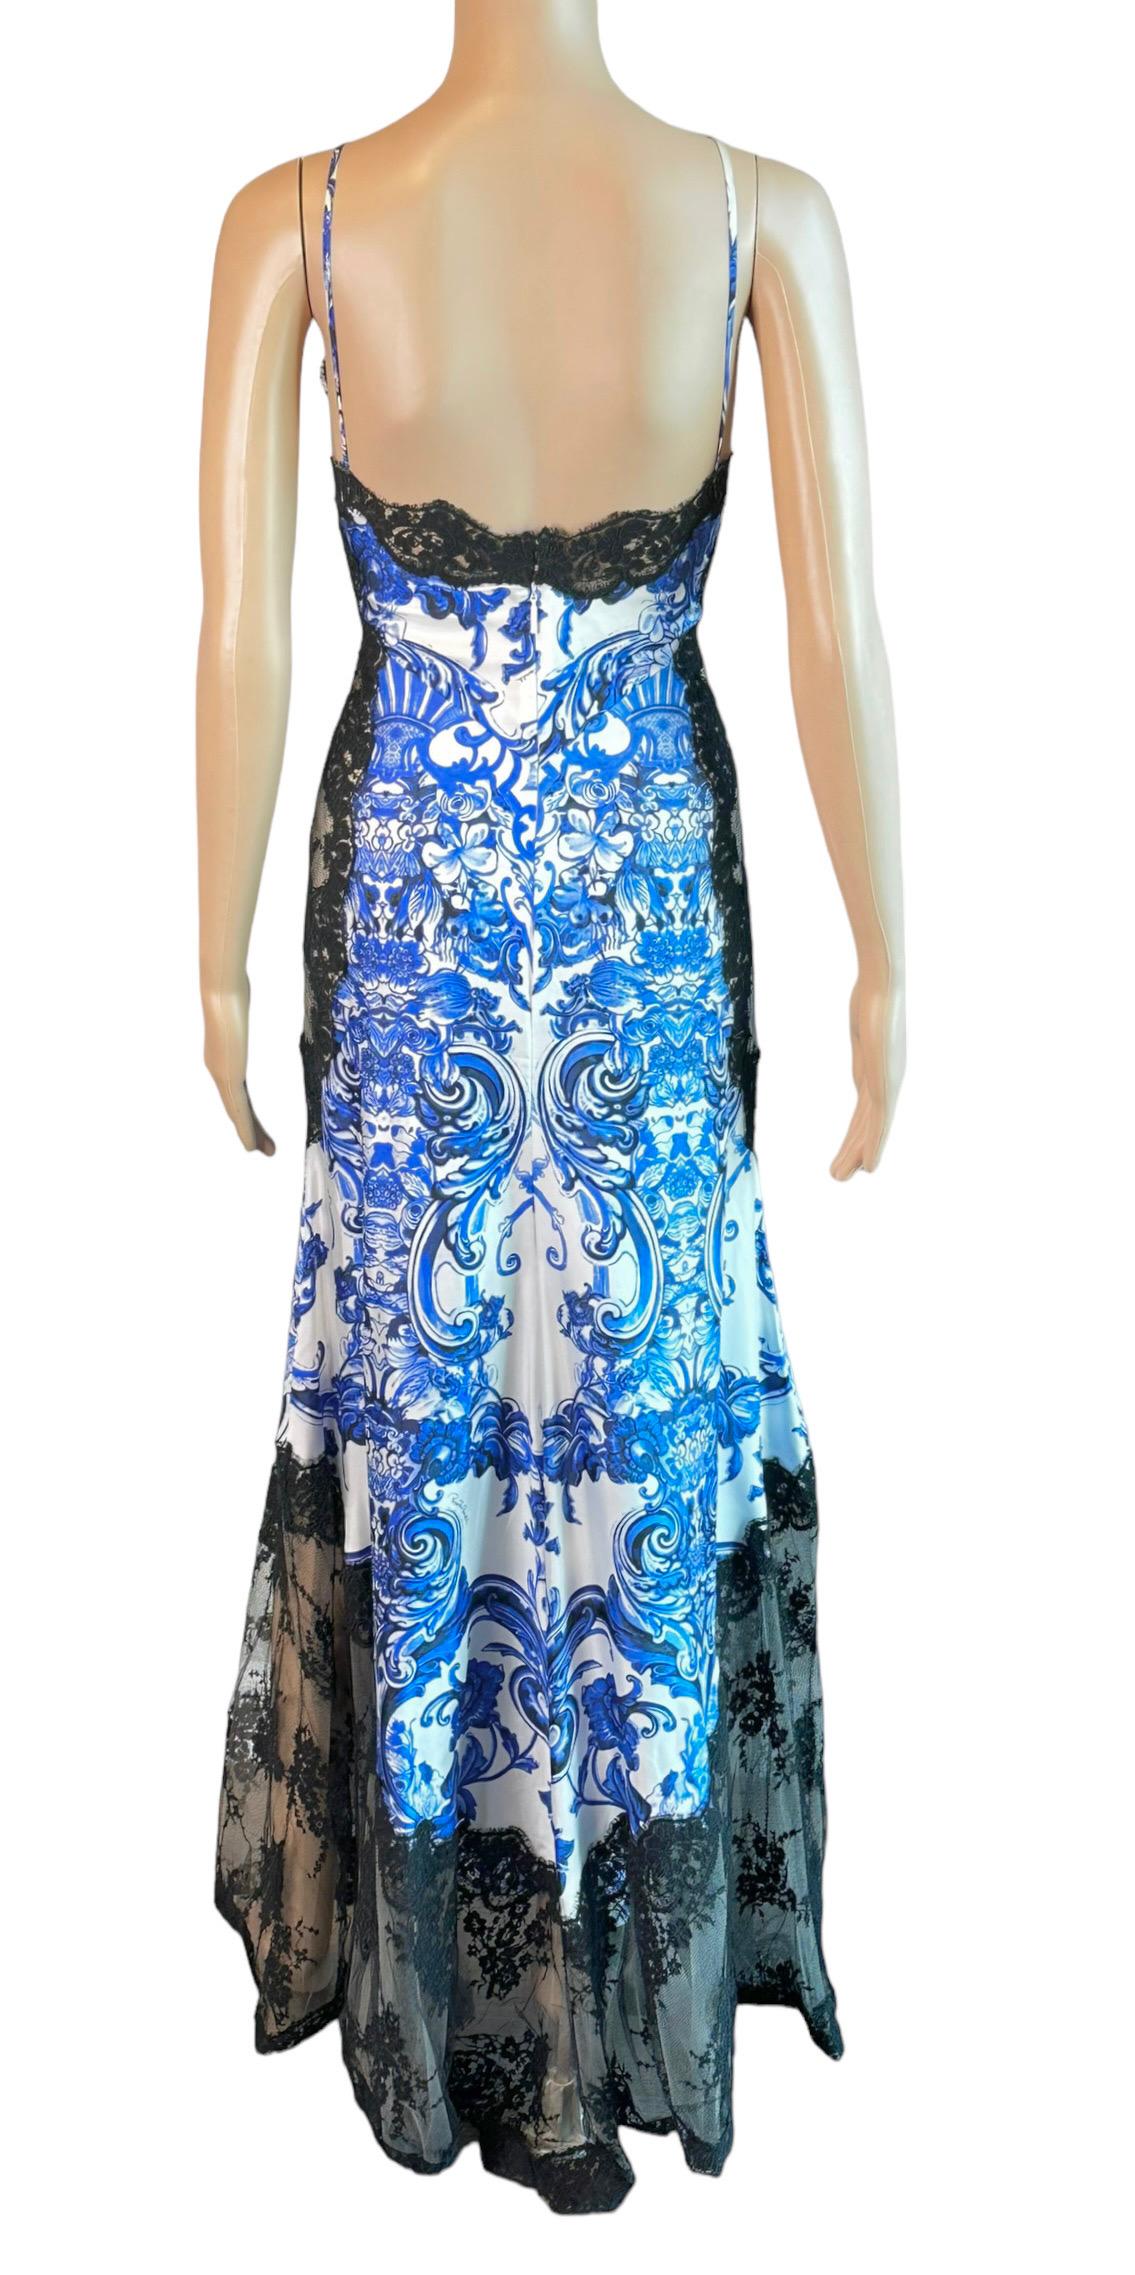 Gray Roberto Cavalli Resort 2013 Chinoiserie Ming Porcelain Sheer Lace Evening Dress For Sale